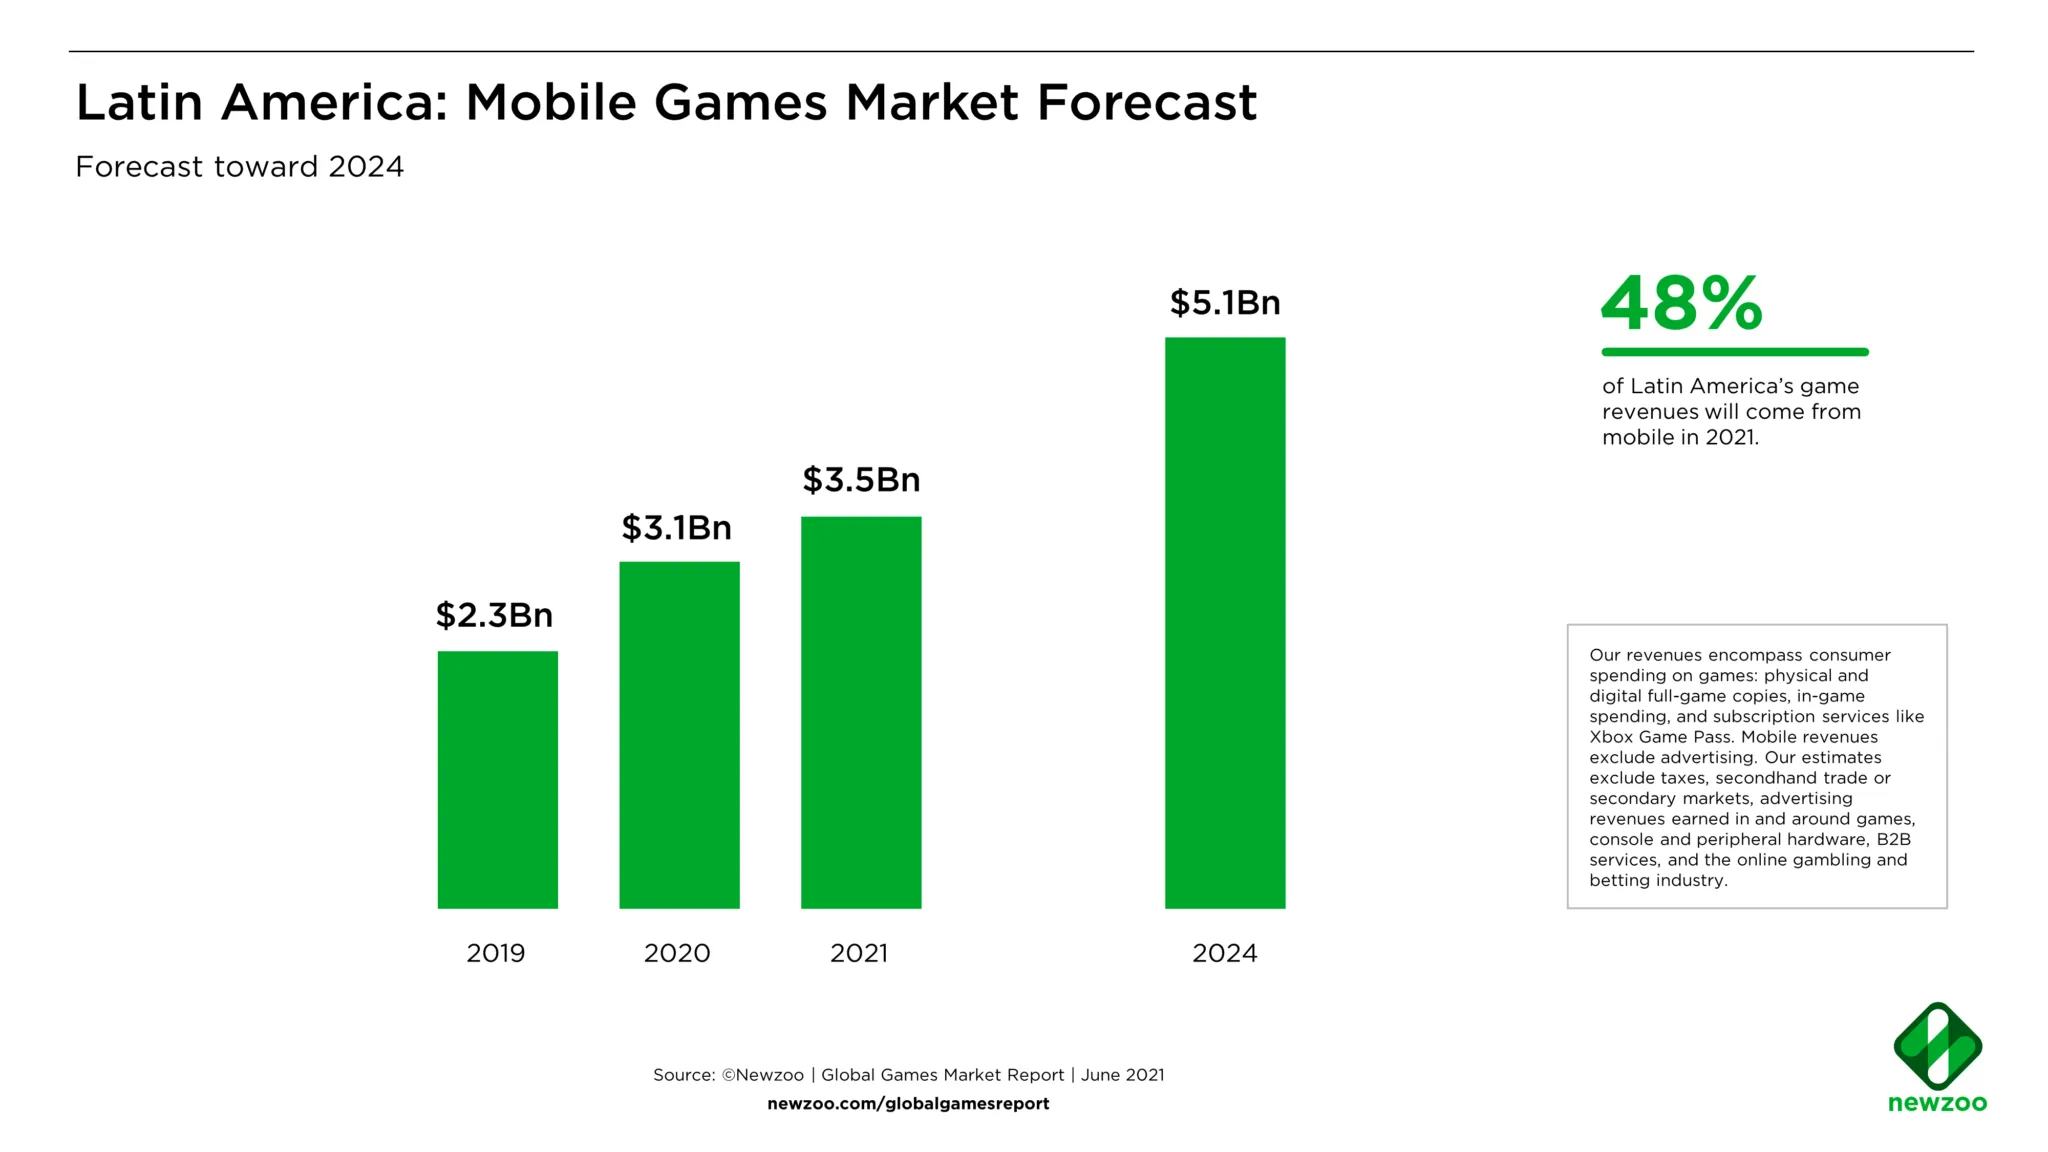 5G for Innovation in the Mobile Gaming Industry